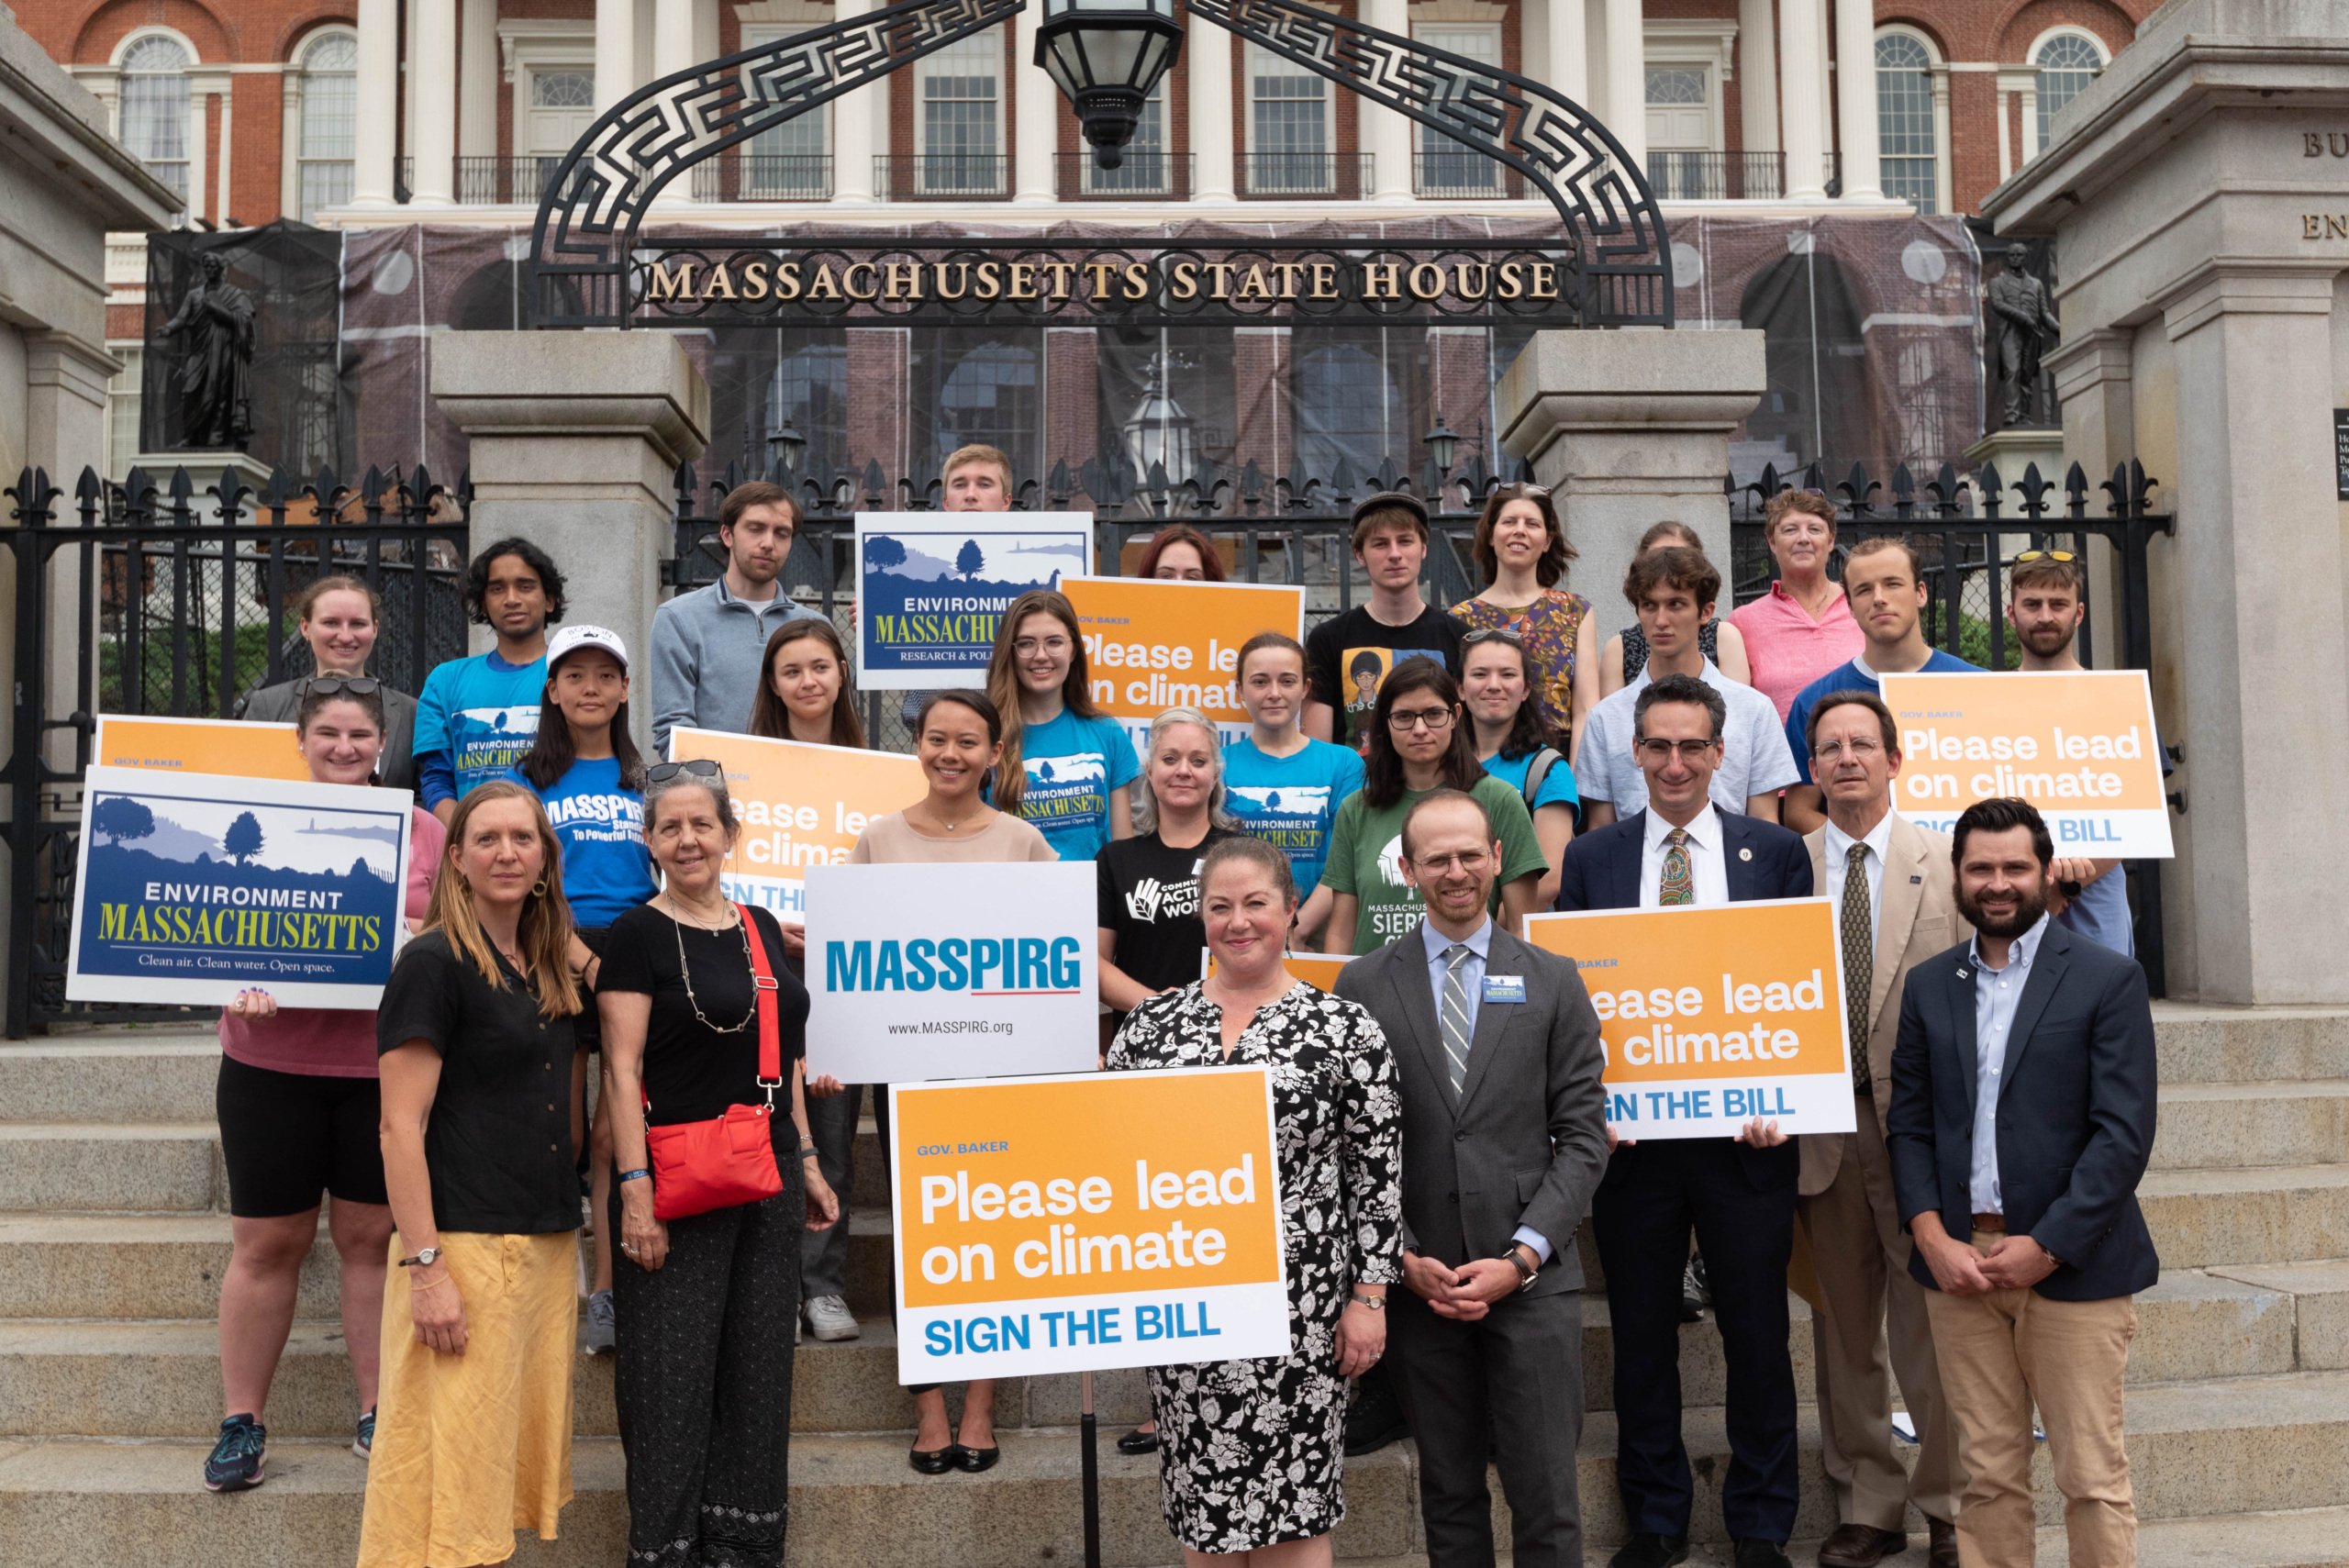 Activists and elected officials stand in front of the Massachusetts State House holding signs asking Gov. Charlie Baker to sign a climate bill.